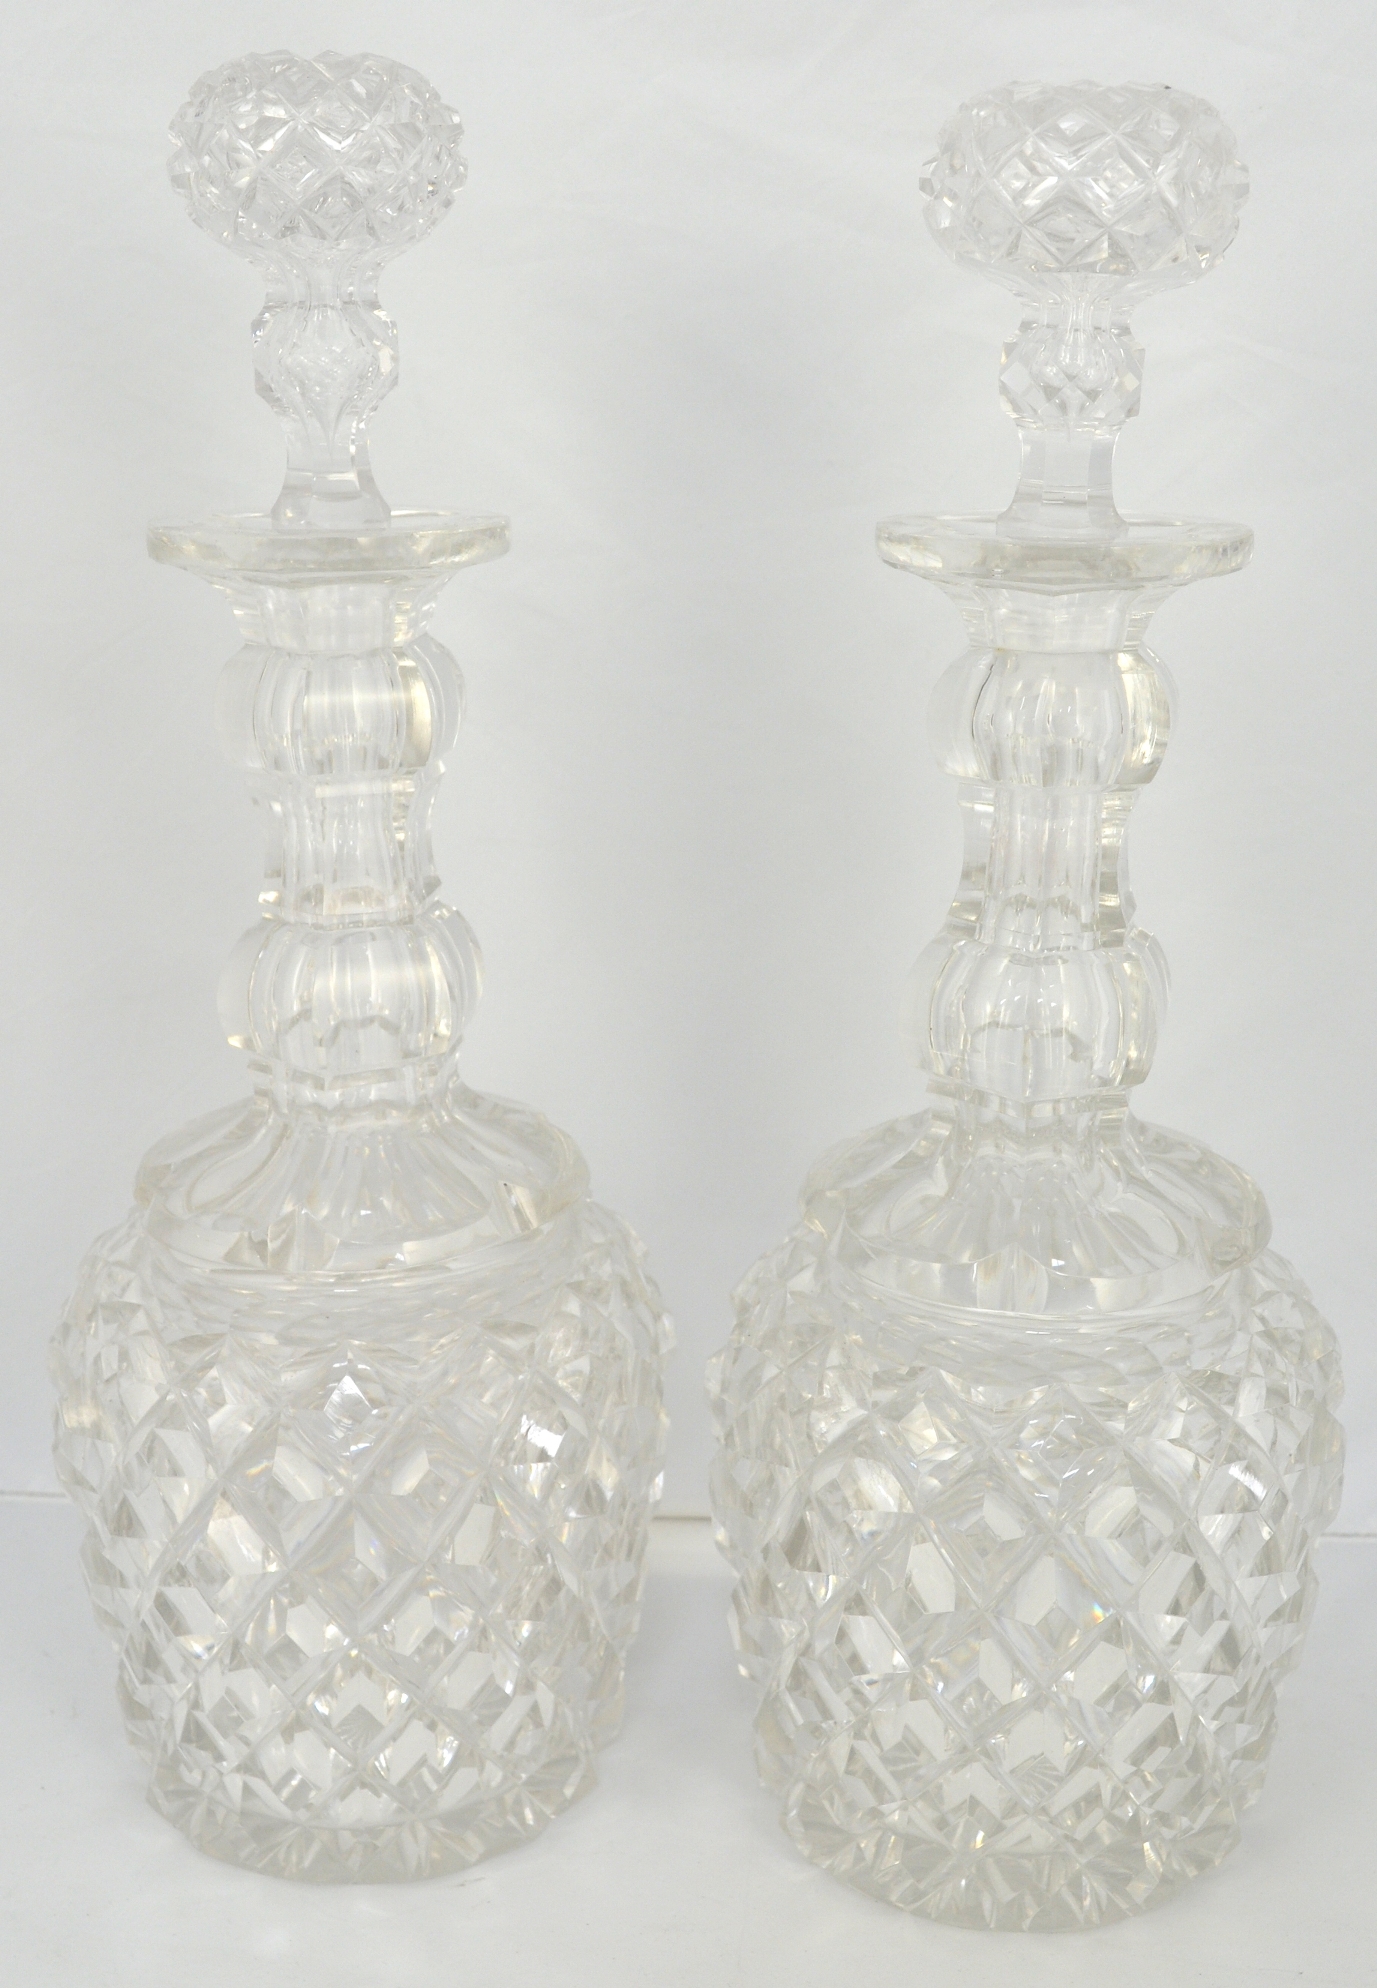 Pair of Waterford style cut glass decanters, with stoppers, height 24cm. - Image 2 of 2